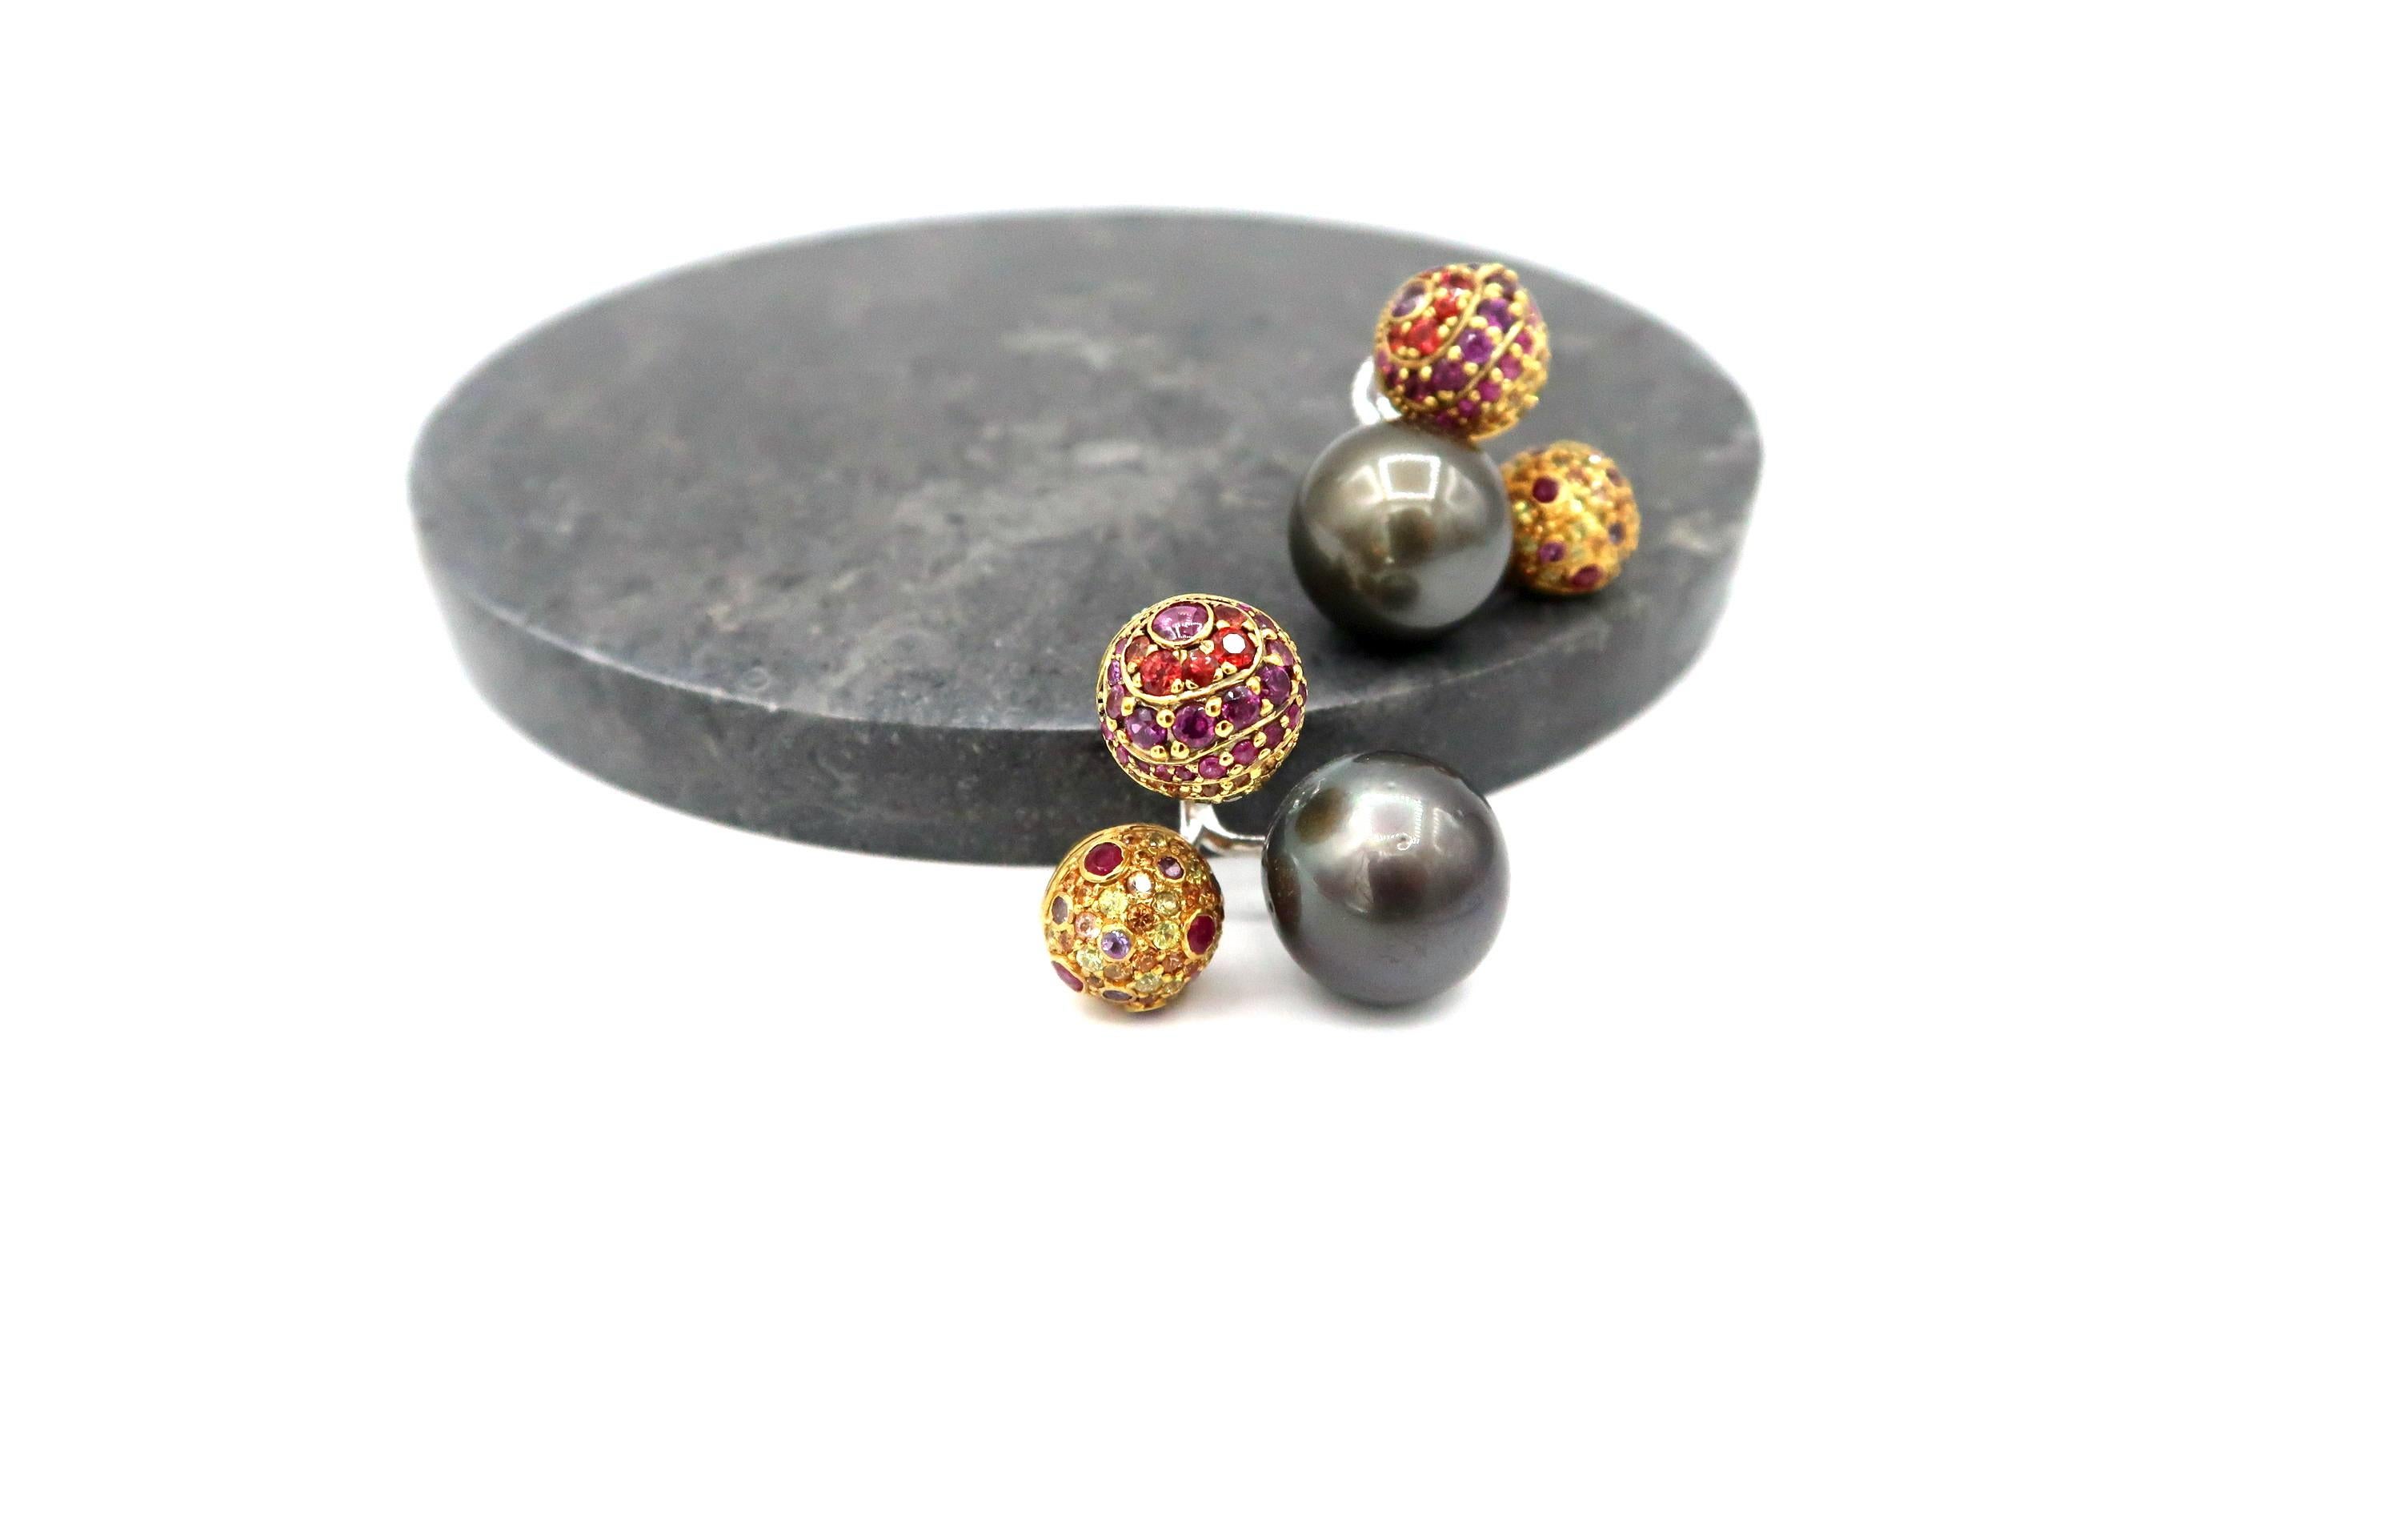 BOON Atomic Ball Front and Back Earrings in 18K Gold Embellished With Tahitian Pearls and Colour Stones

Pearls: Tahitian Pearls 2pcs.
Gold: 18K Gold 13.09g.
Coloured Stones: Yellow Sapphire, Pink Sapphire, Ruby, Amethyst, 2.92 total carat